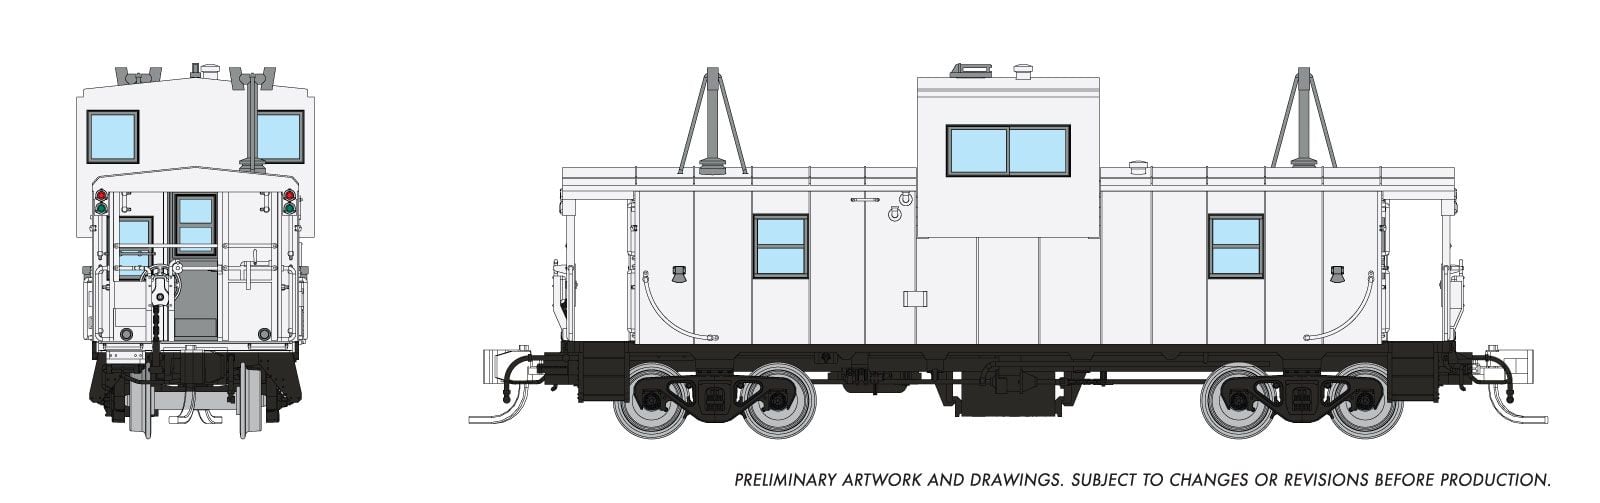 Rapido 510097 N Wide Vision Caboose: Painted, Unlettered - White